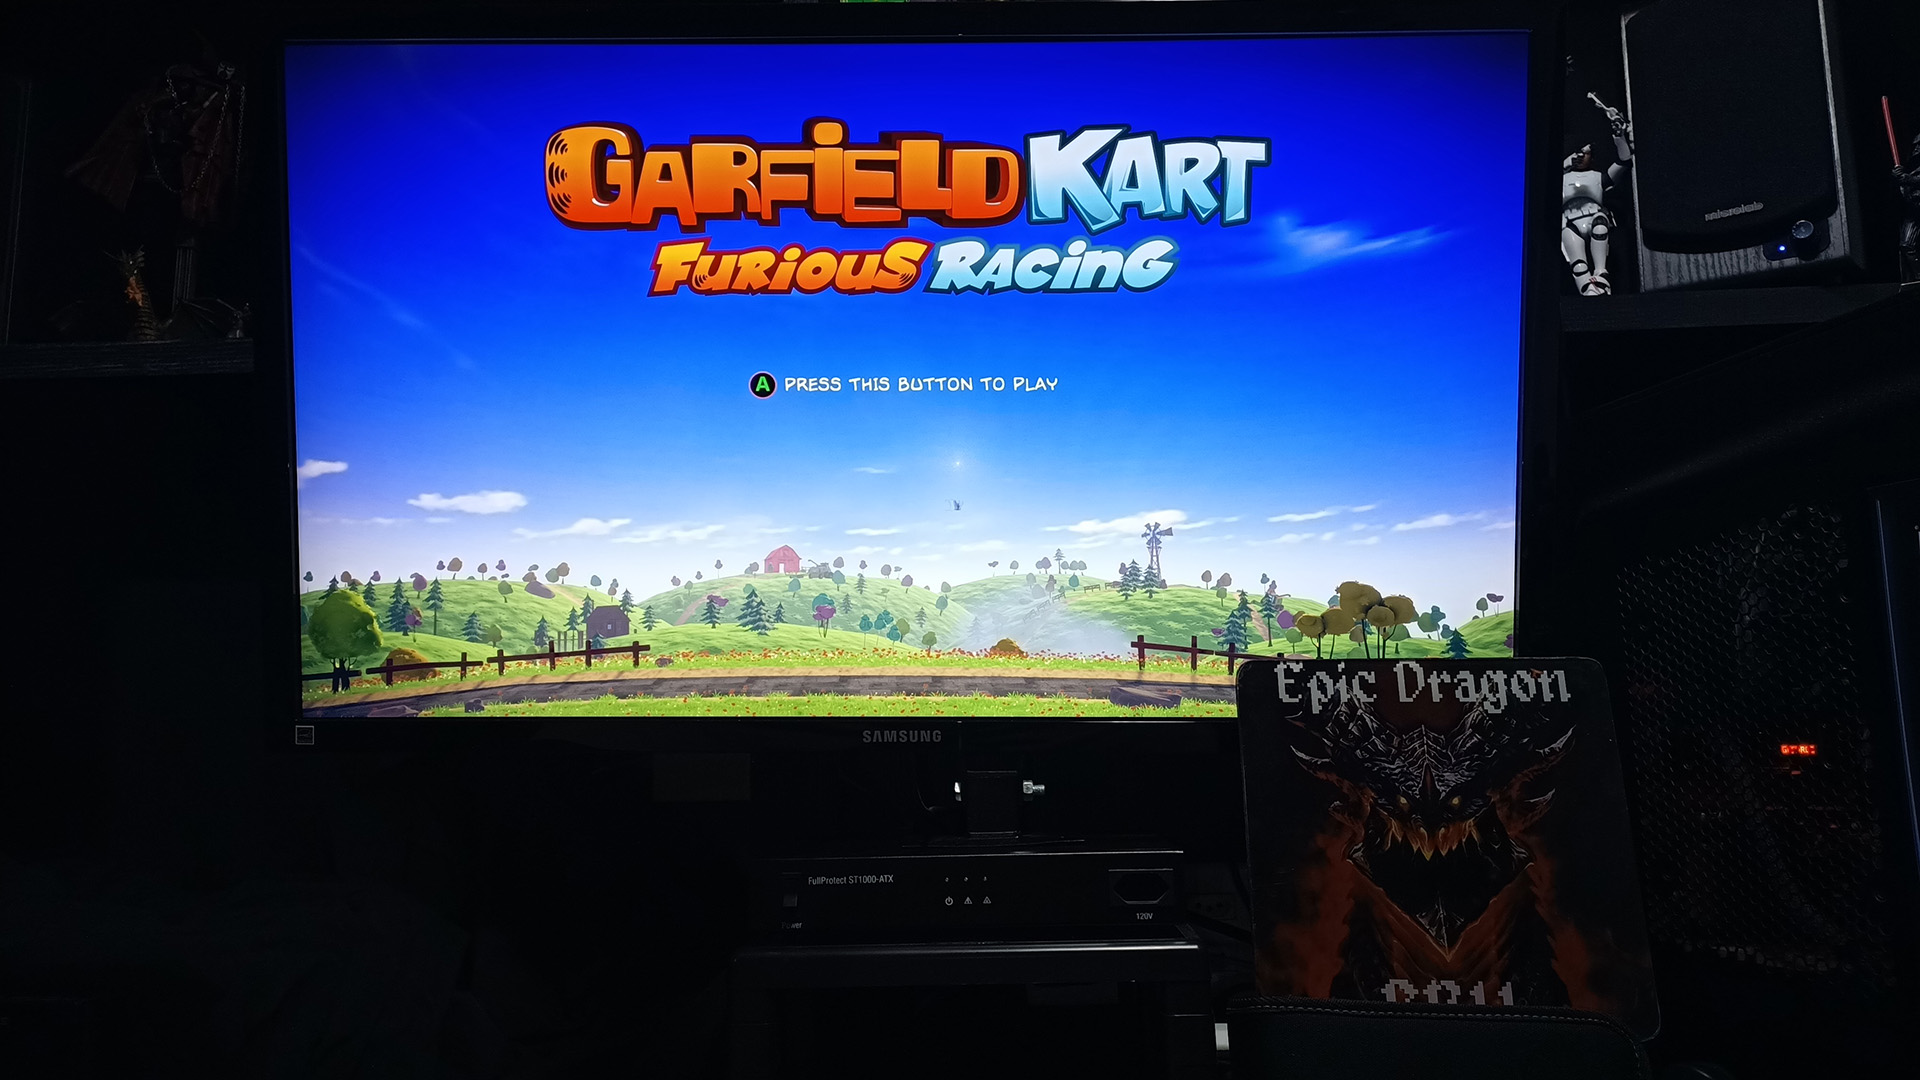 EpicDragon: Garfield Kart Furious Racing: Prohibited Site [Time Trial: 3 Laps] (PC) 0:02:53.973 points on 2022-08-14 14:59:47